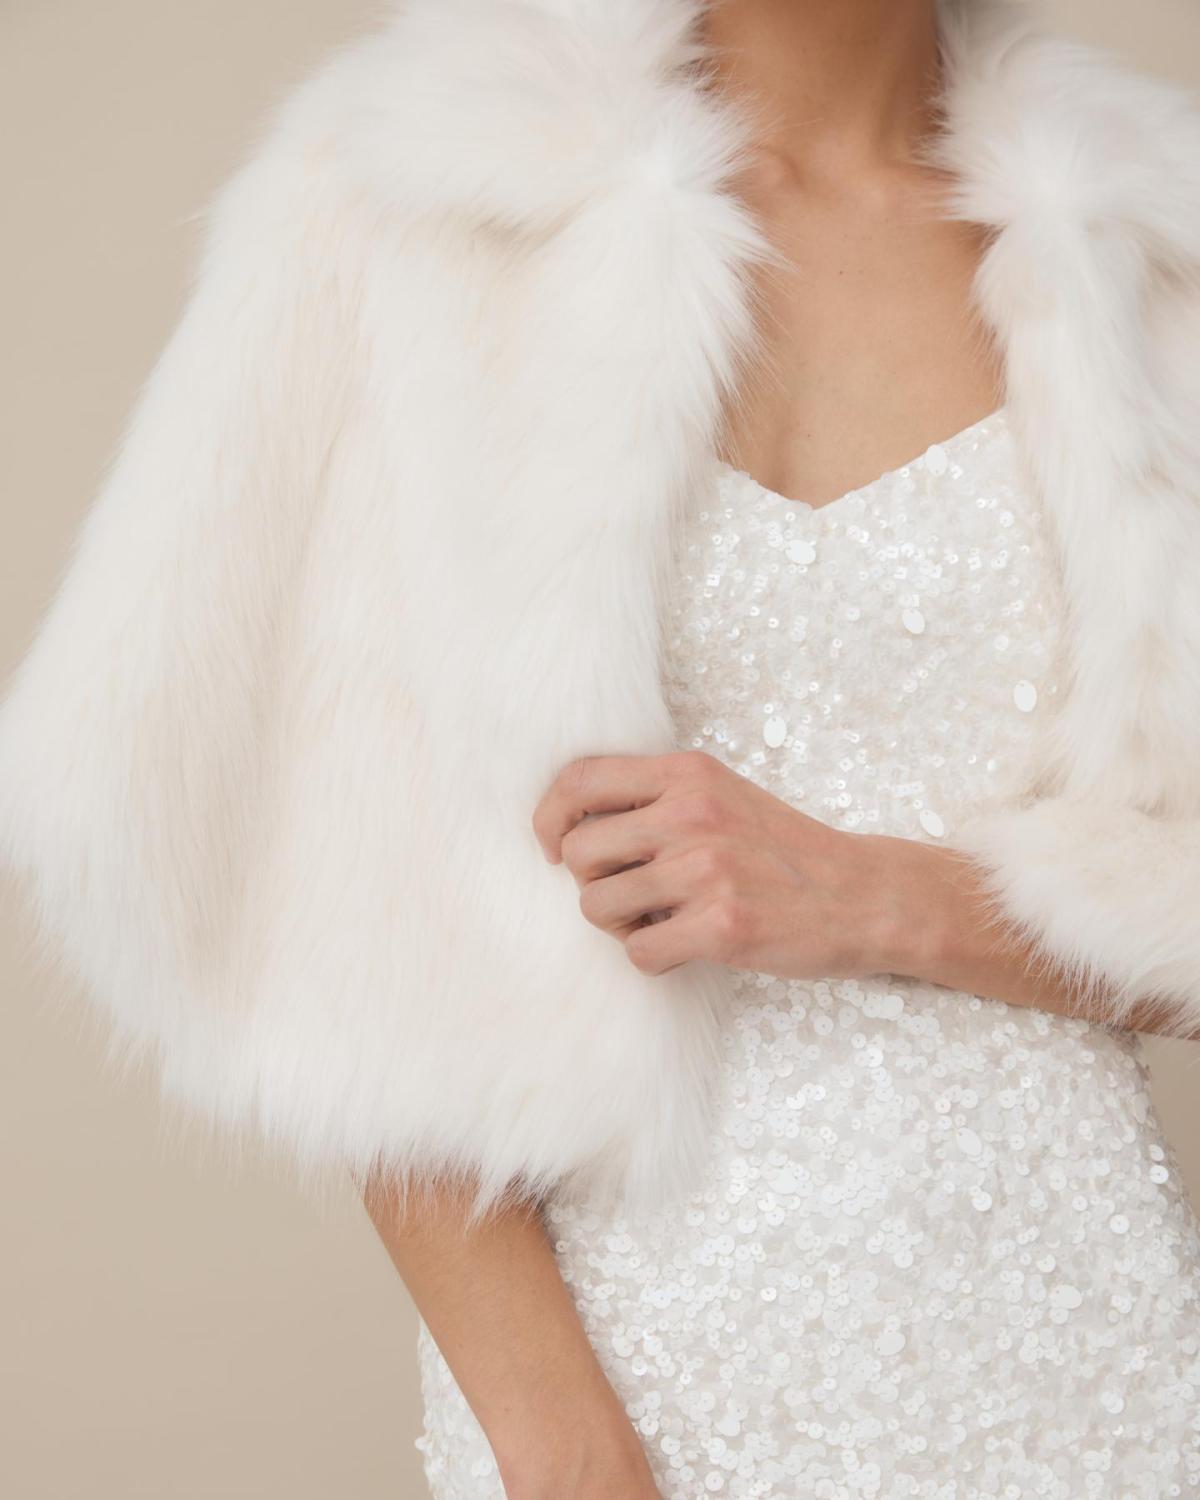 Nord Cape by Unreal fur-a modern wedding cover up made from faux fur worn with the Anya beaded bridal mini